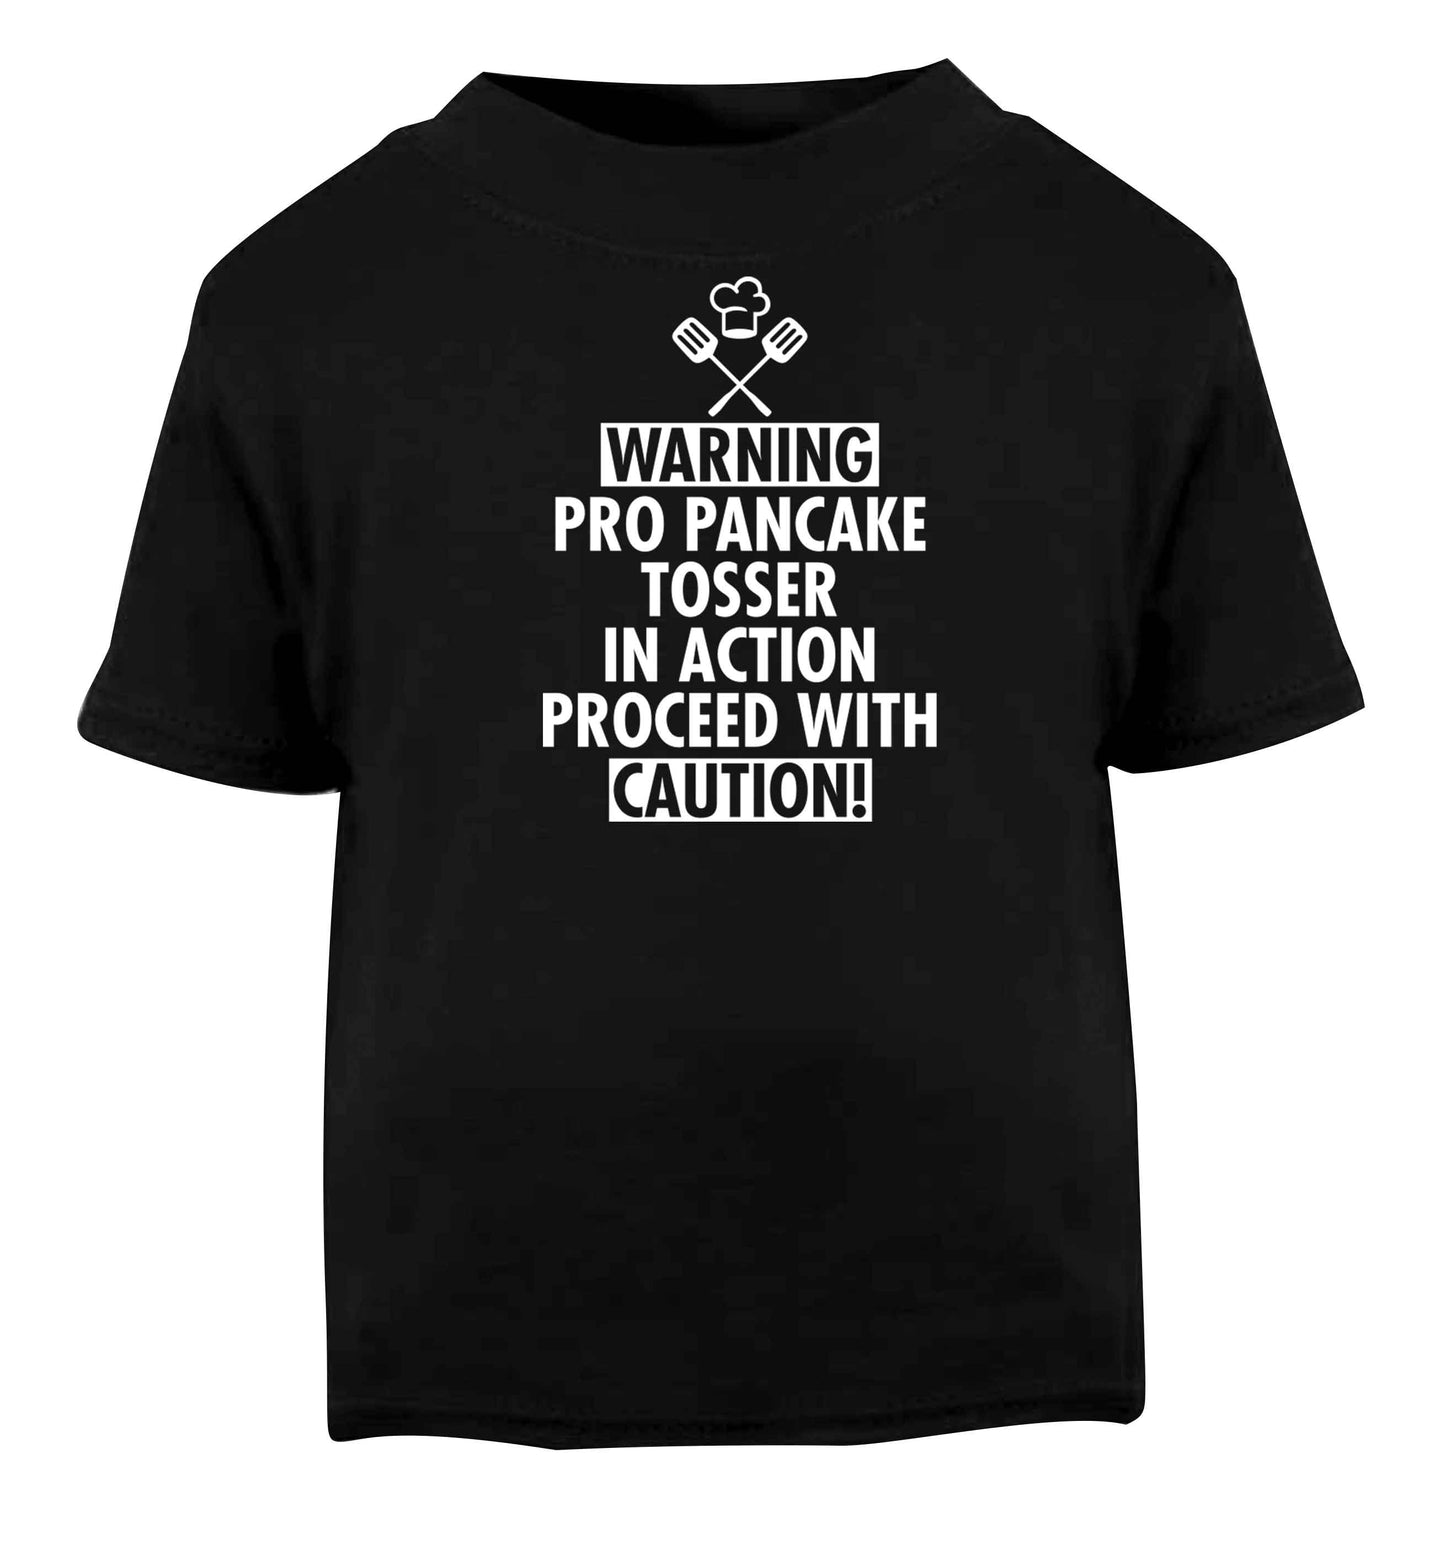 Warning pro pancake tosser in action proceed with caution Black baby toddler Tshirt 2 years